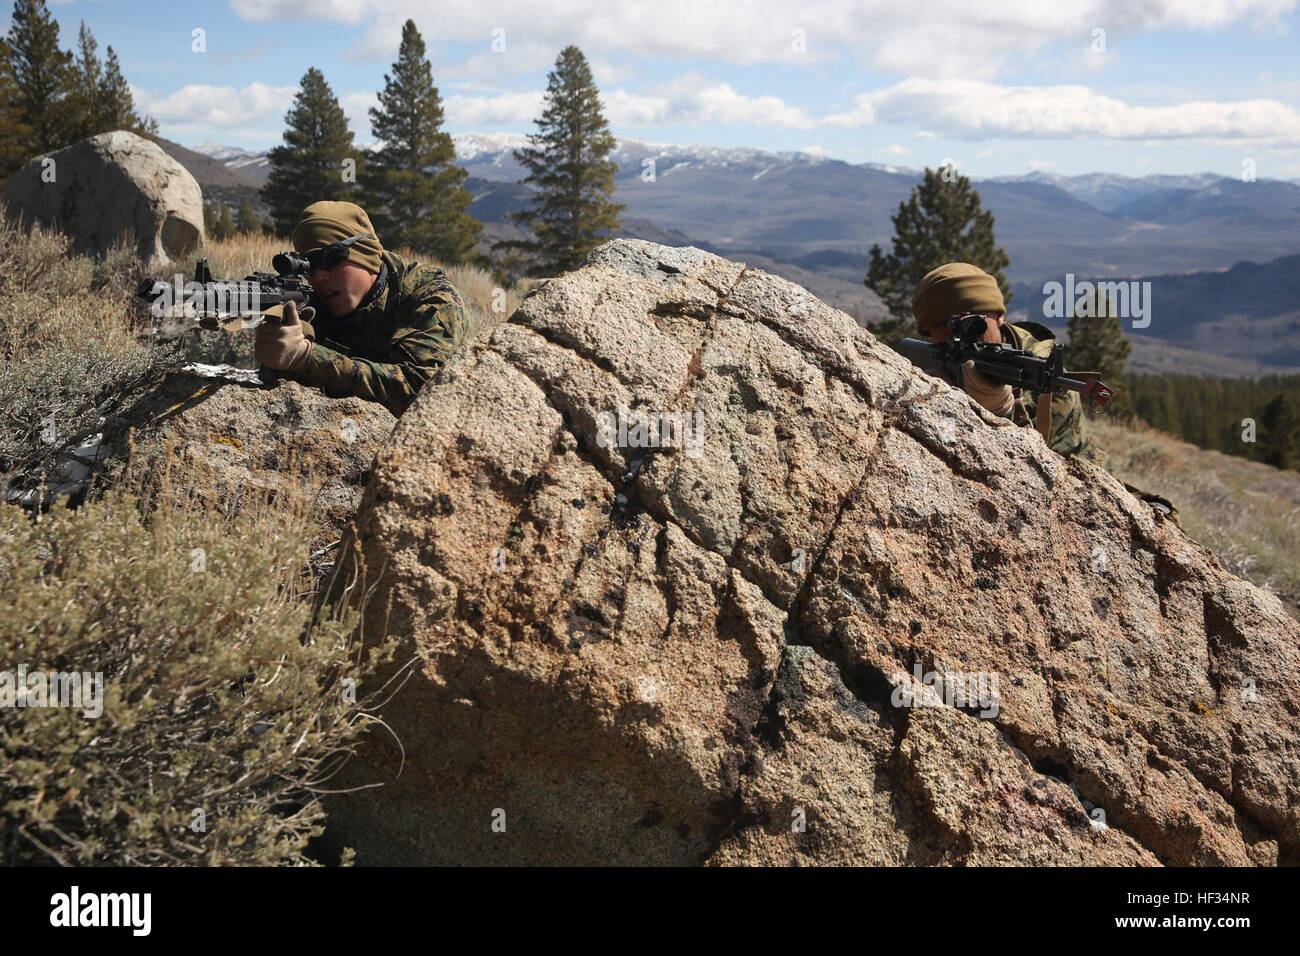 Lance Cpl. Taylor Trion, native of Tulsa, Okla., and Pfc. Joseph Tweedy, native of San Diego, assaultmen with 1st Battalion, 3rd Marine Regiment, set up security behind a boulder during Mountain Training Exercise 2-15 at the Marine Corps Mountain Warfare Training Center,  March 23, 2015. (Official Marine Corps photo by Cpl. Charles Santamaria/Released) 'Lava Dogs' prepare for 'every clime and place' 150323-M-YE994-553 Stock Photo